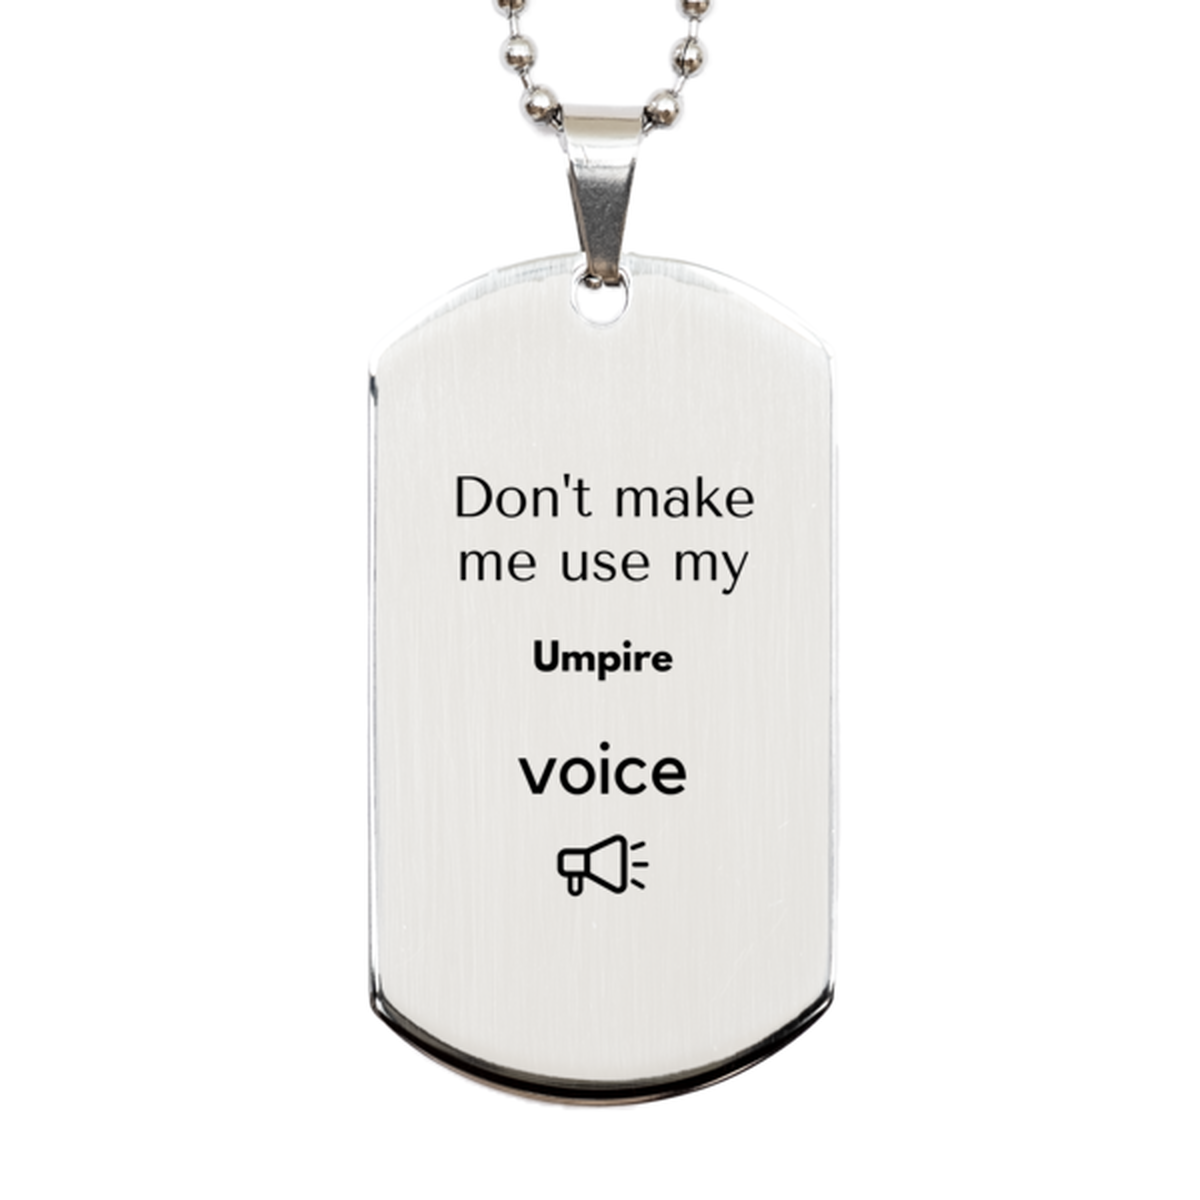 Don't make me use my Umpire voice, Sarcasm Umpire Gifts, Christmas Umpire Silver Dog Tag Birthday Unique Gifts For Umpire Coworkers, Men, Women, Colleague, Friends